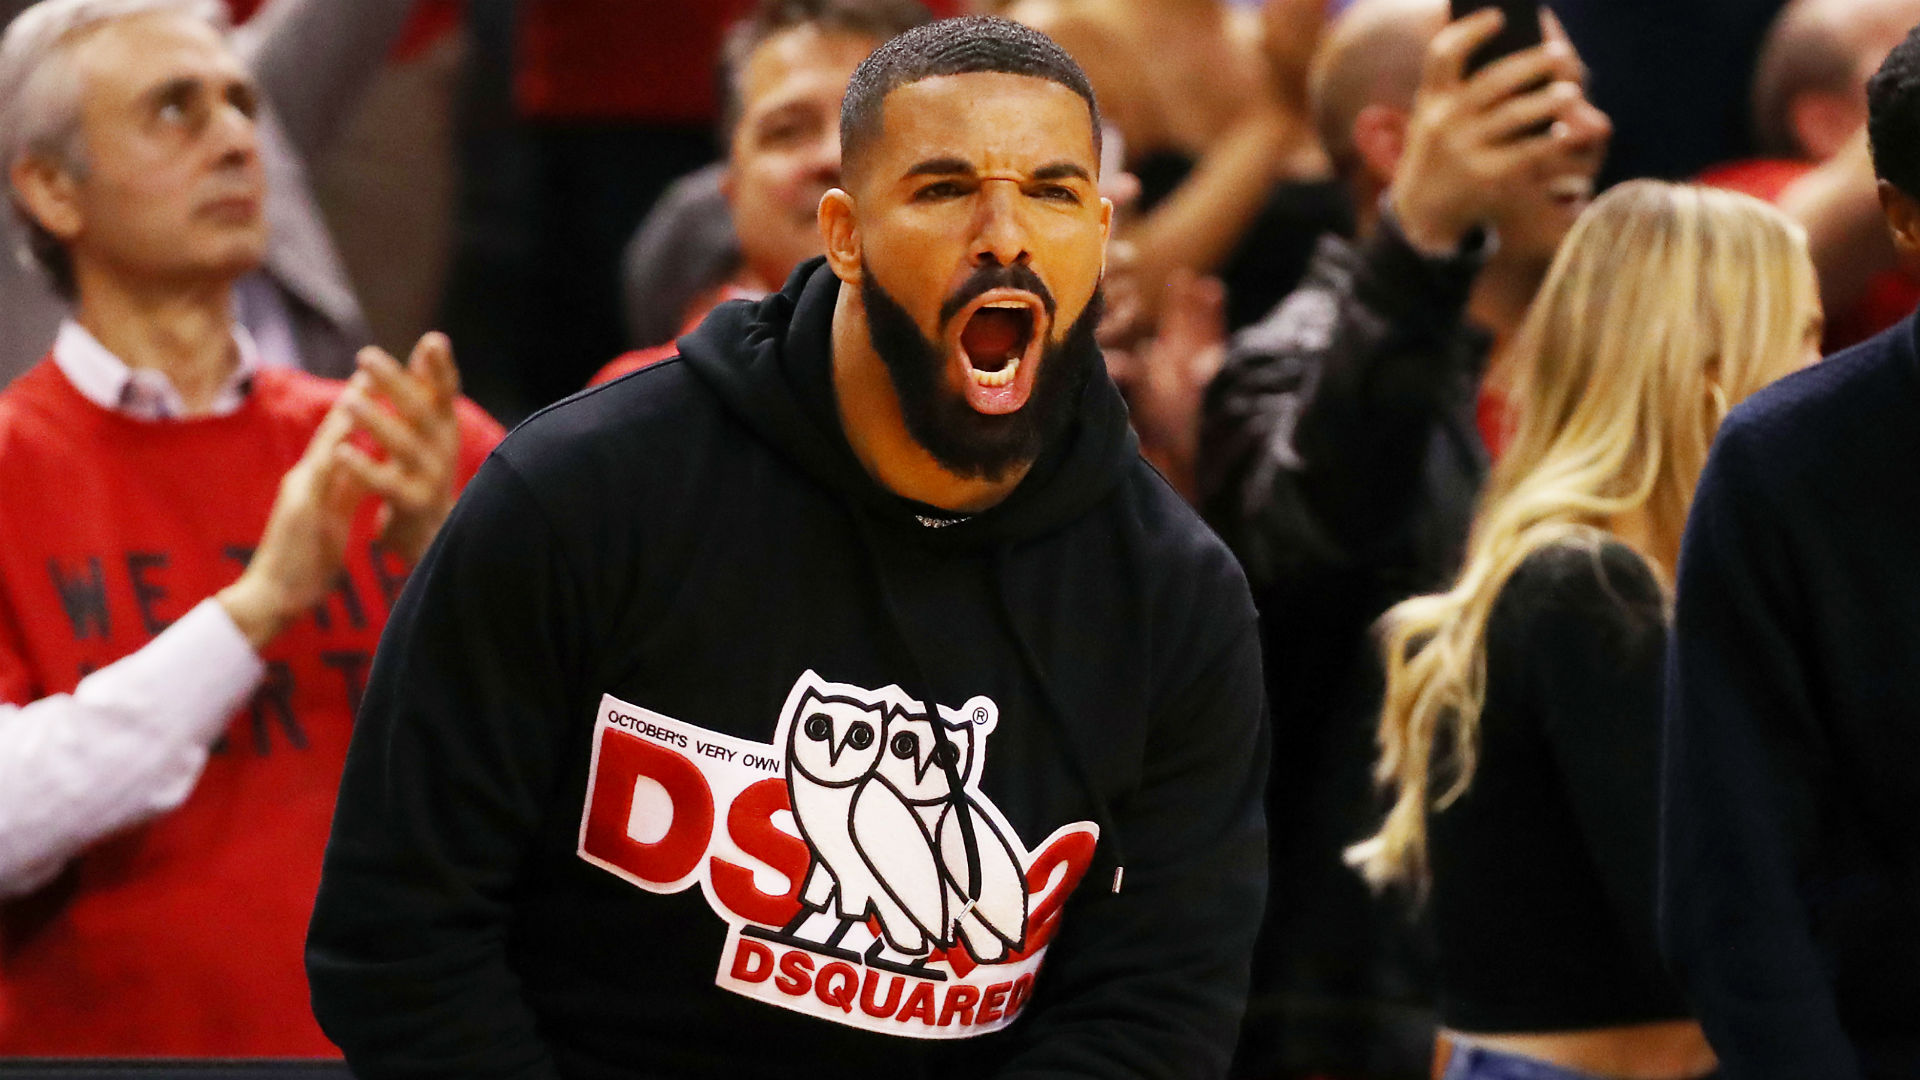 After the Raptors beat the Bucks, Canadian rapper Drake defended his courtside antics during the Eastern Conference Finals.